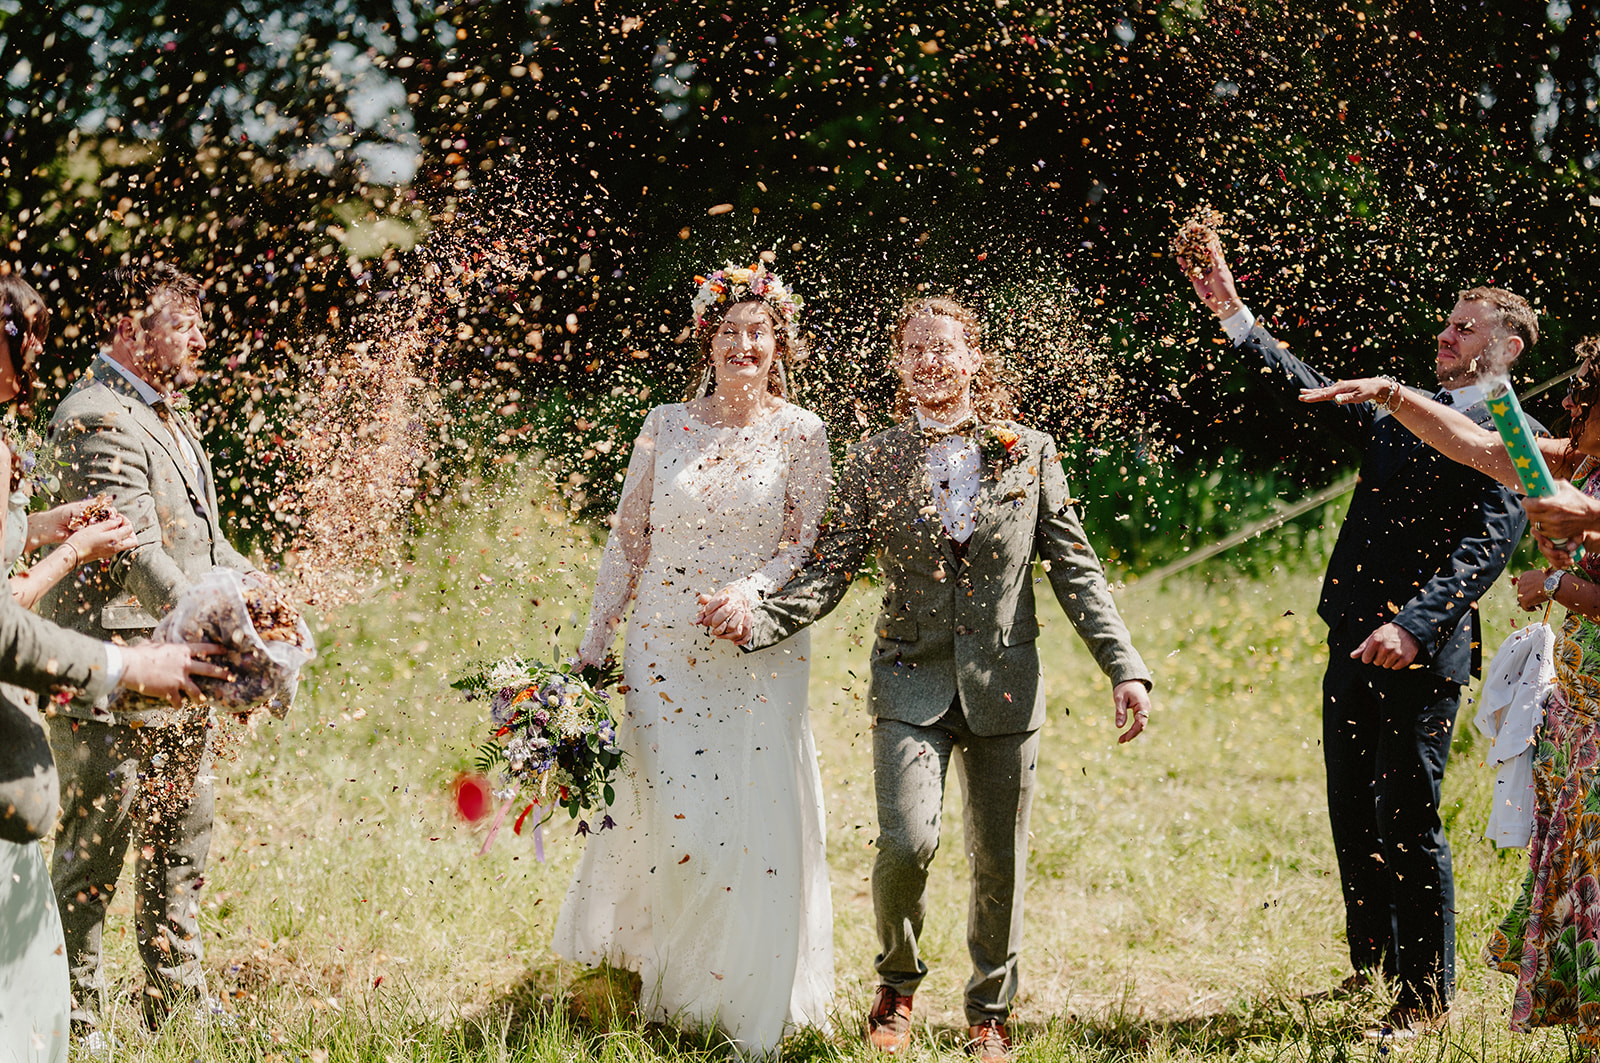 dried flower petals in canons exploding on the kent wedding day